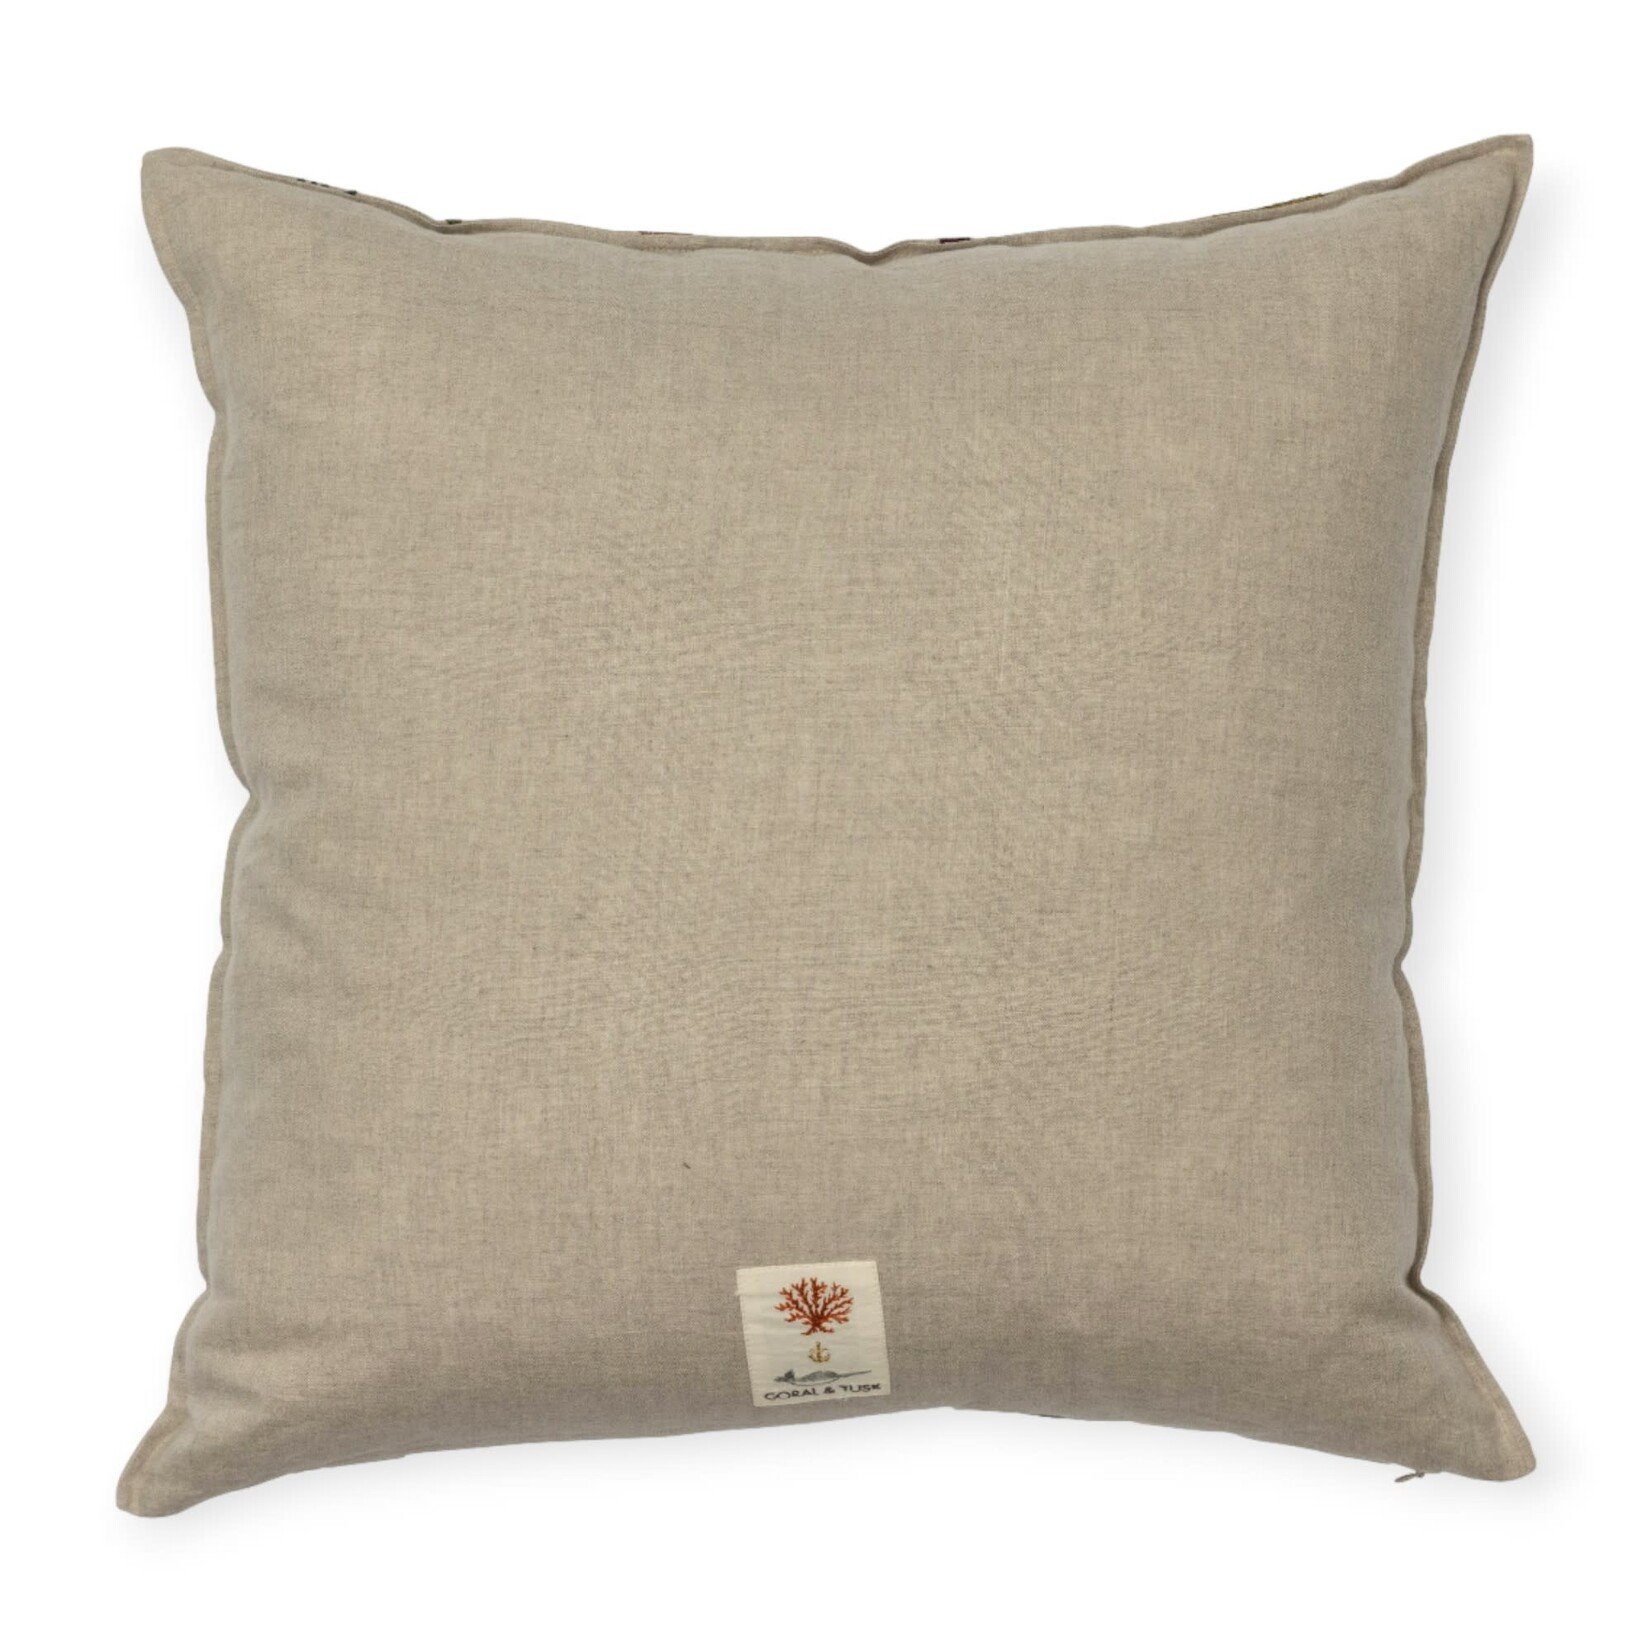 Coral & Tusk Falling Feathers Pillow